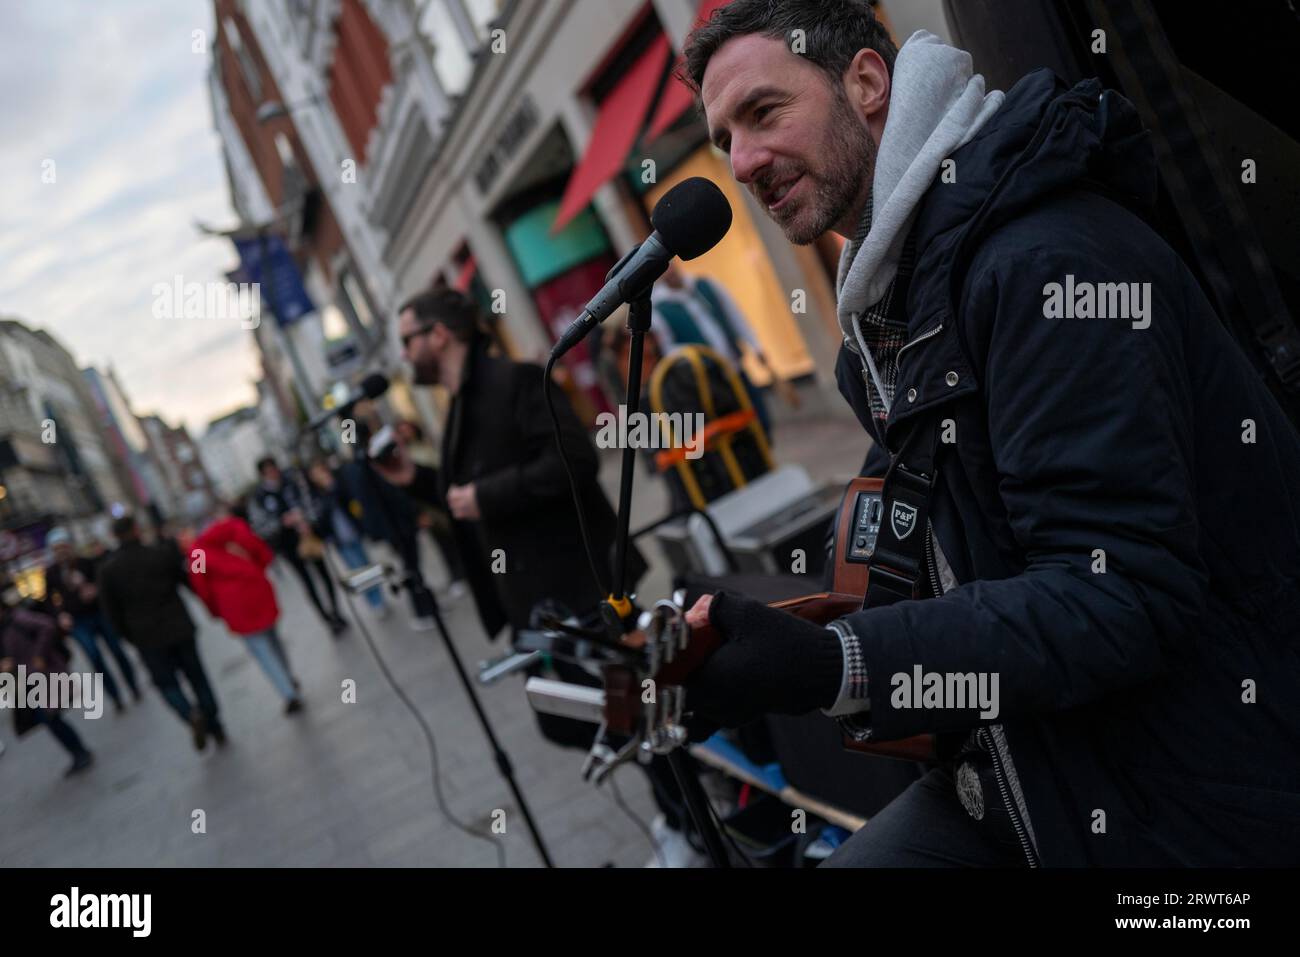 Andrew Glover of Irish pop group Keywest playing in Grafton Street with lead singer Andrew Kavanagh in the back ground. Dublin, Ireland, Europe Stock Photo